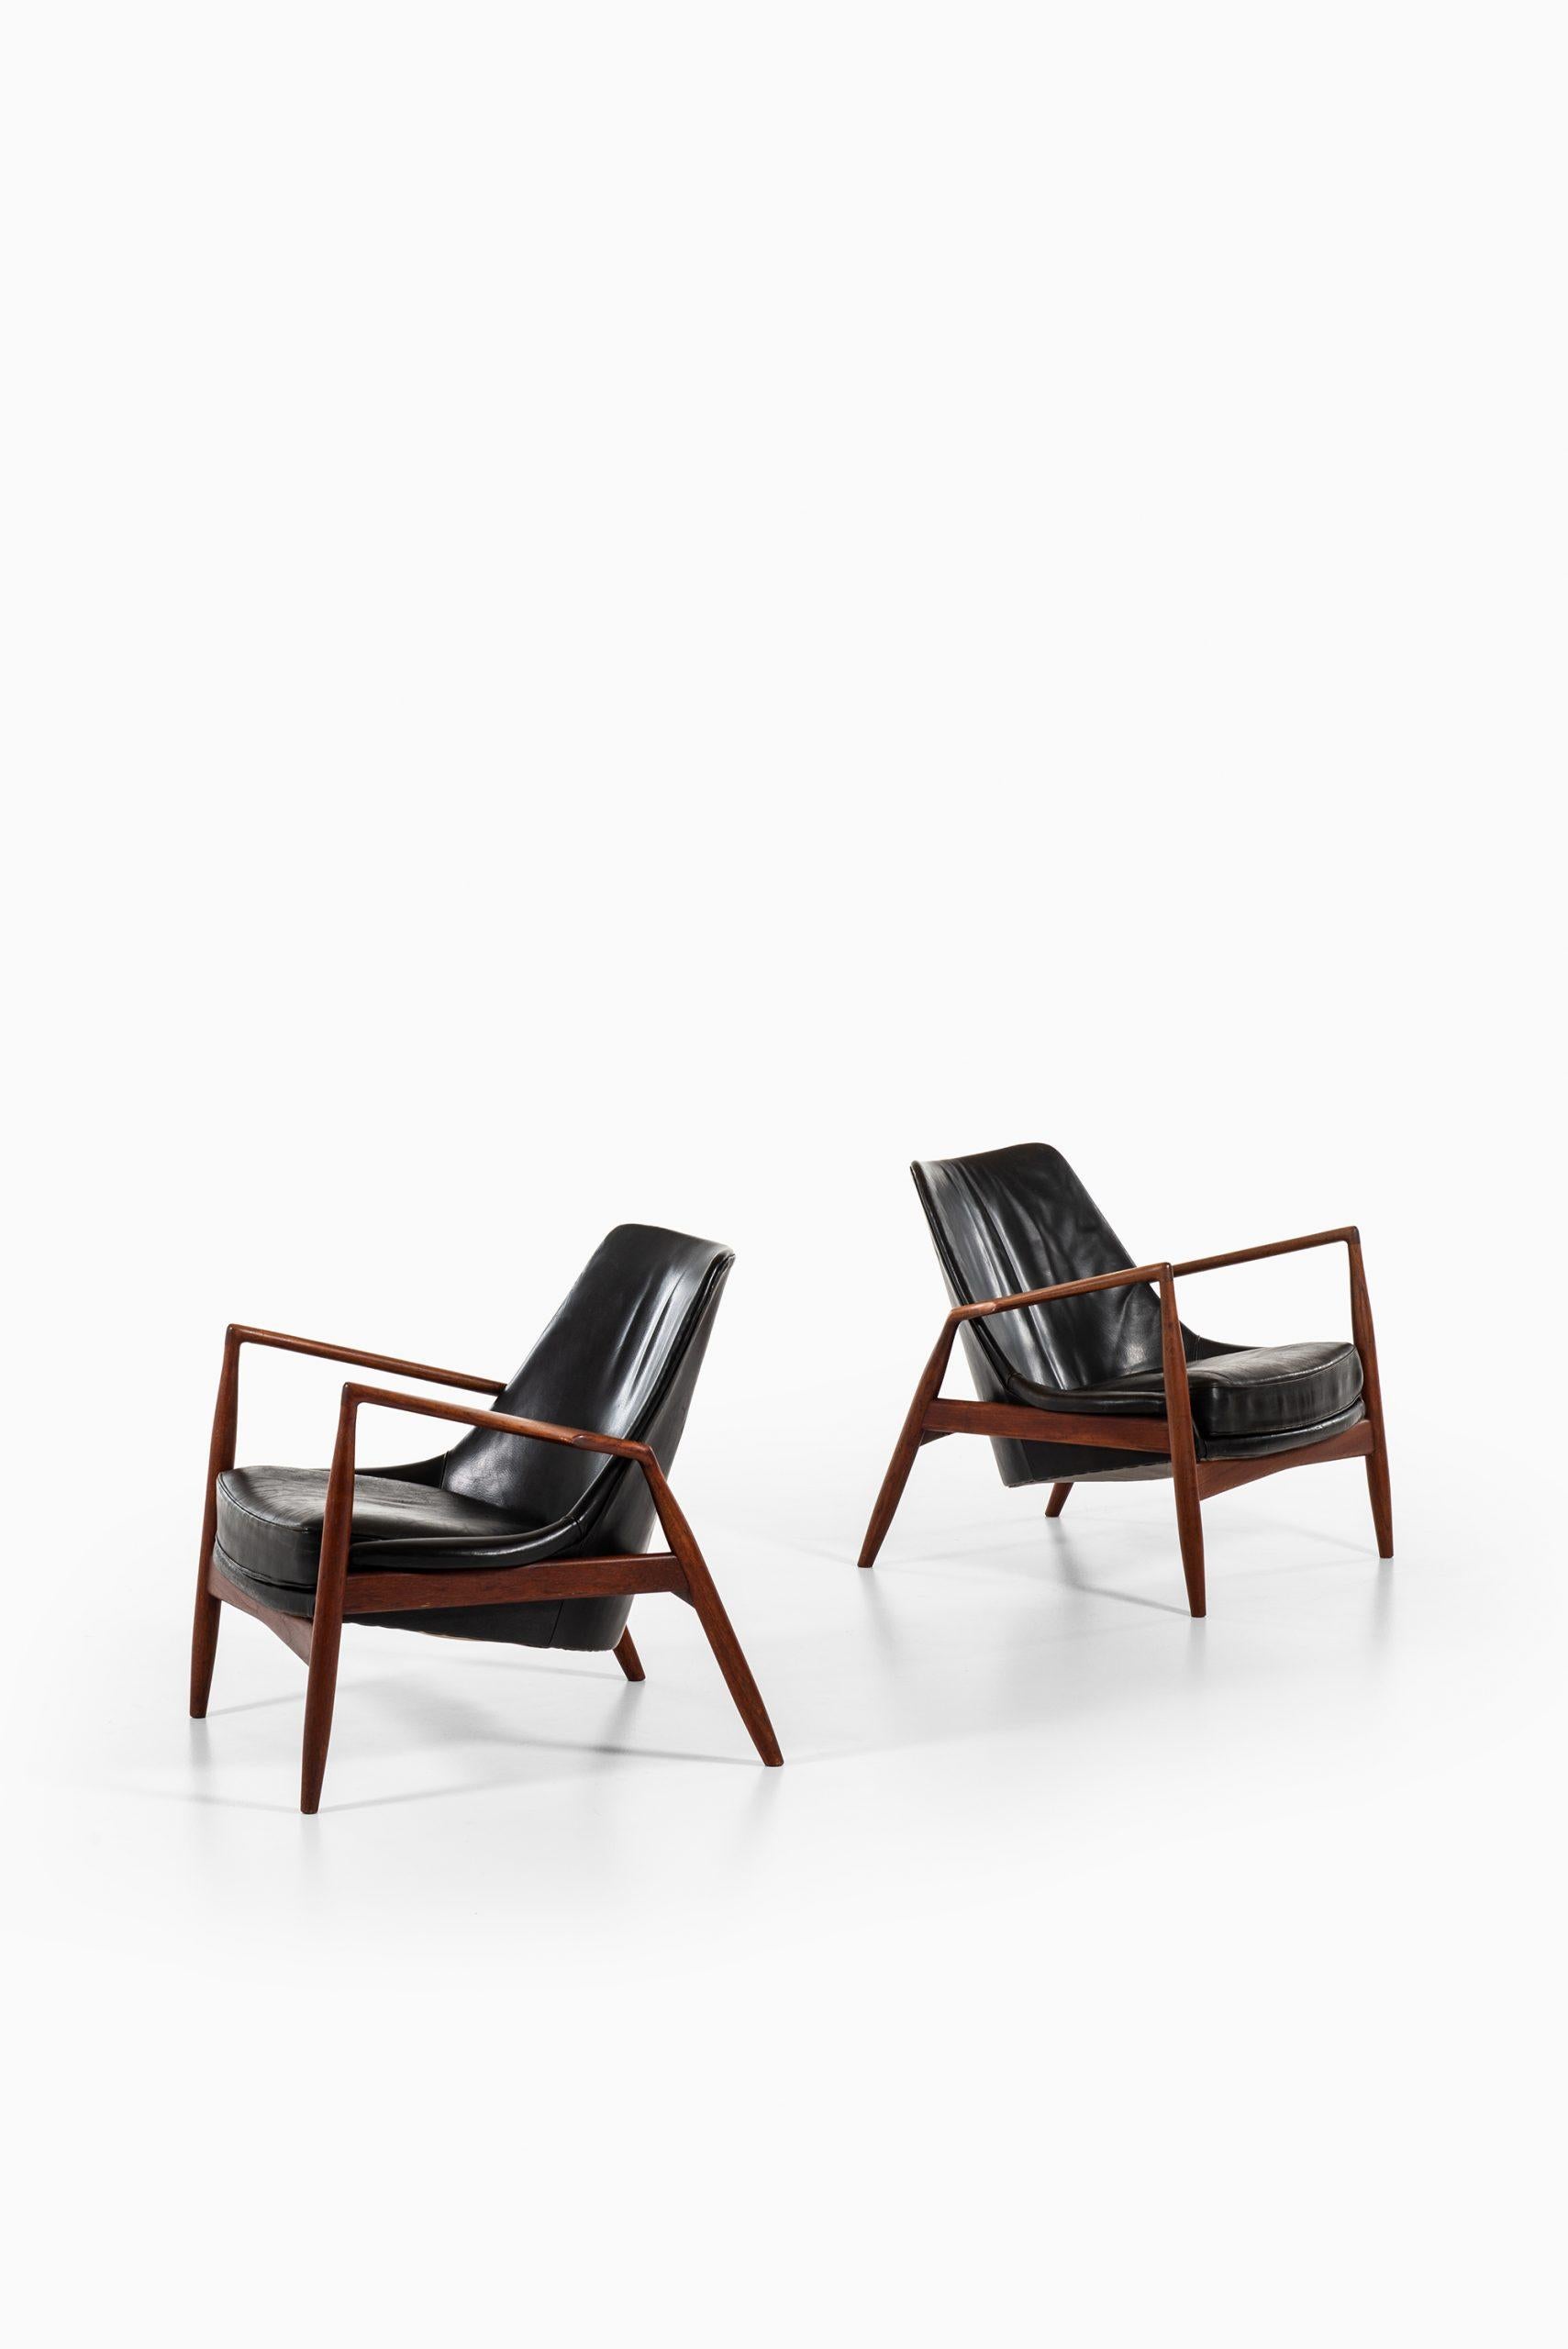 Rare pair of easy chairs model Sälen / Seal designed by Ib Kofod-Larsen. Produced by OPE in Sweden.